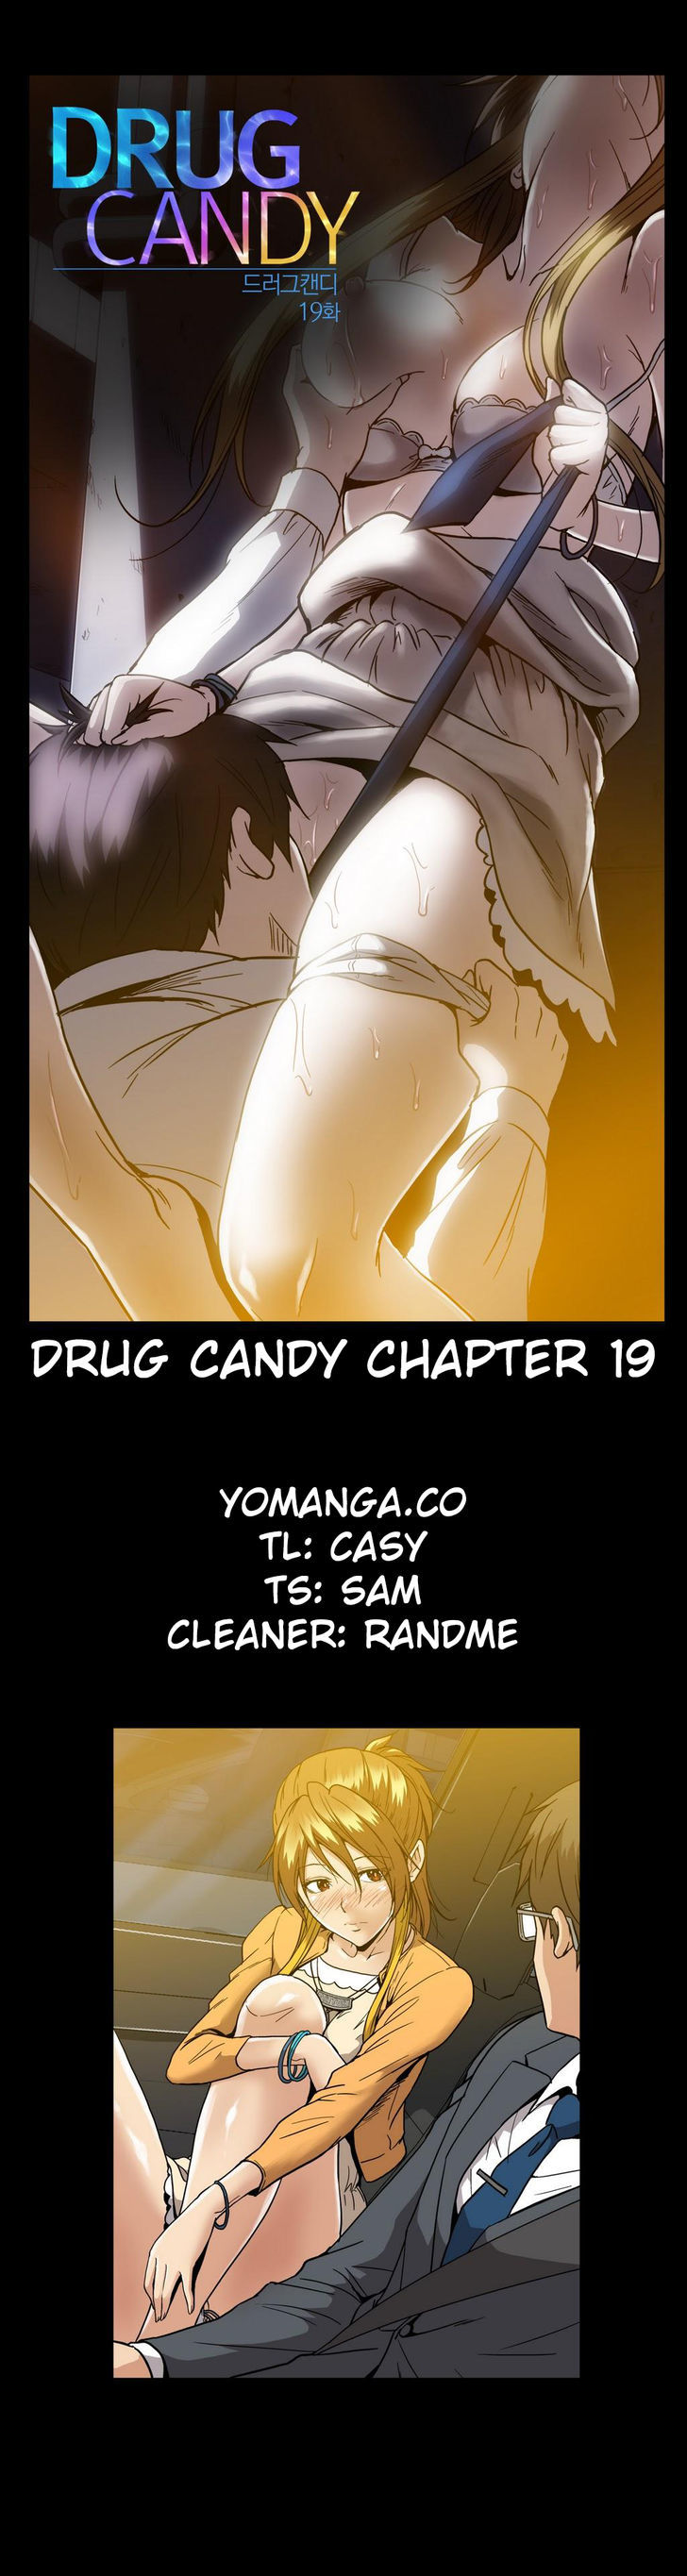 Drug Candy - Chapter 19 Page 1